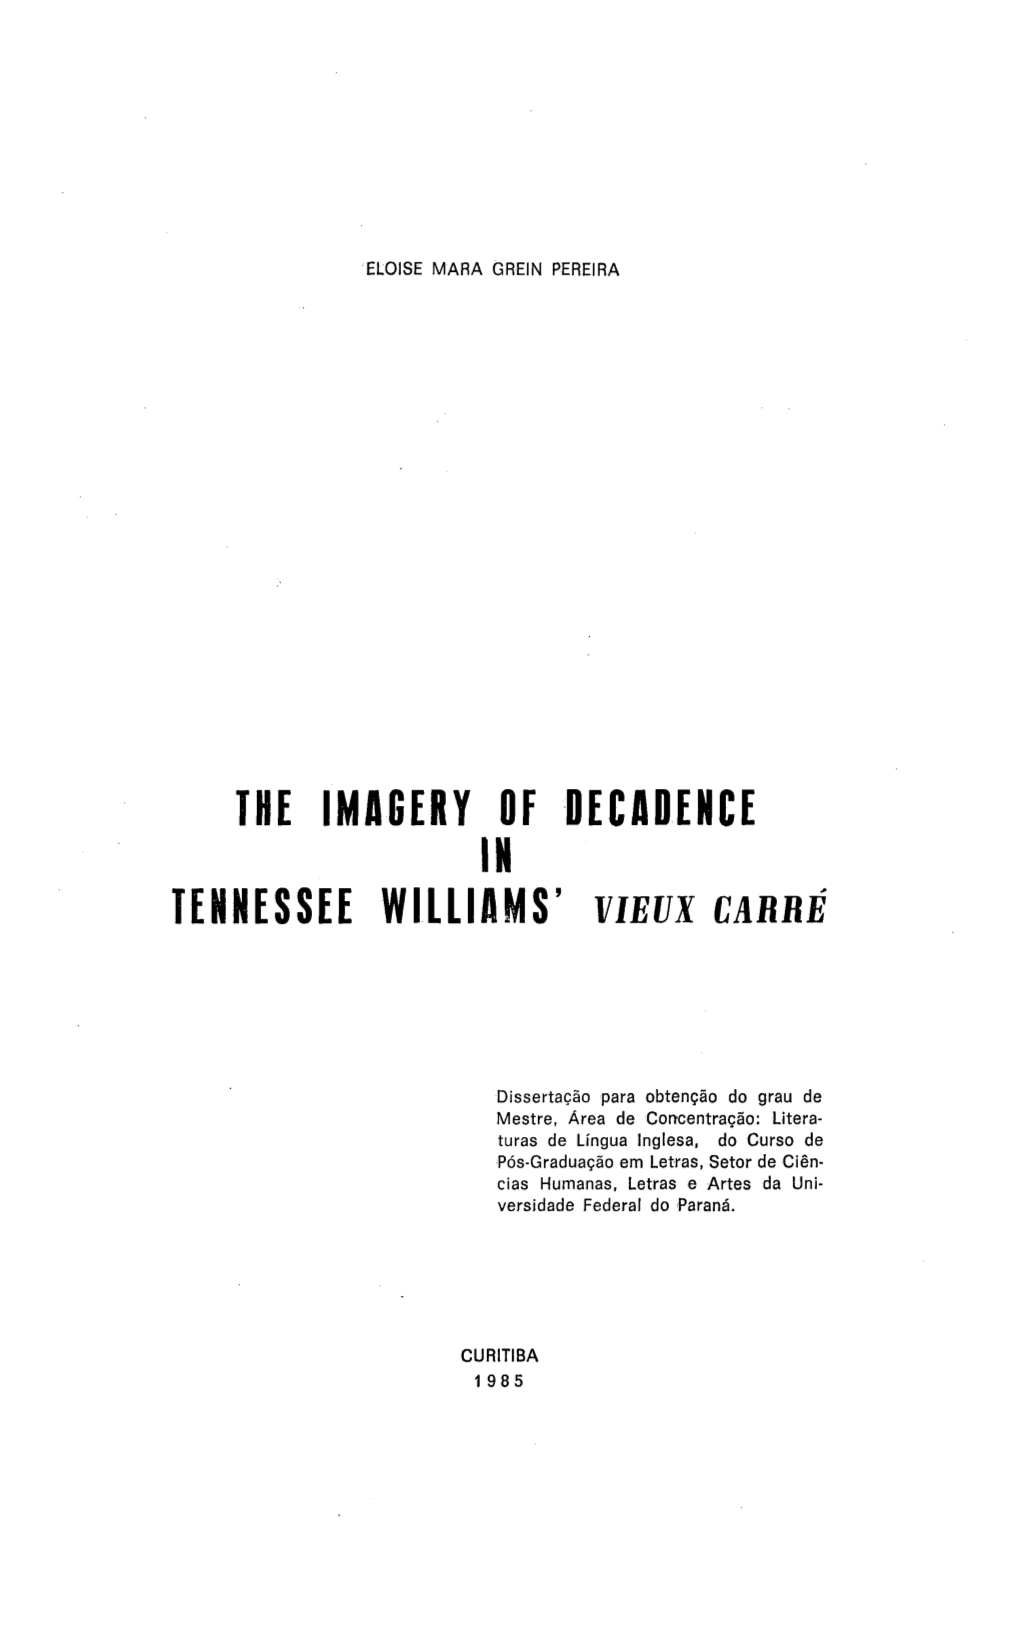 The Imagery of Decadence in Tennessee Williams' Vievx Carré